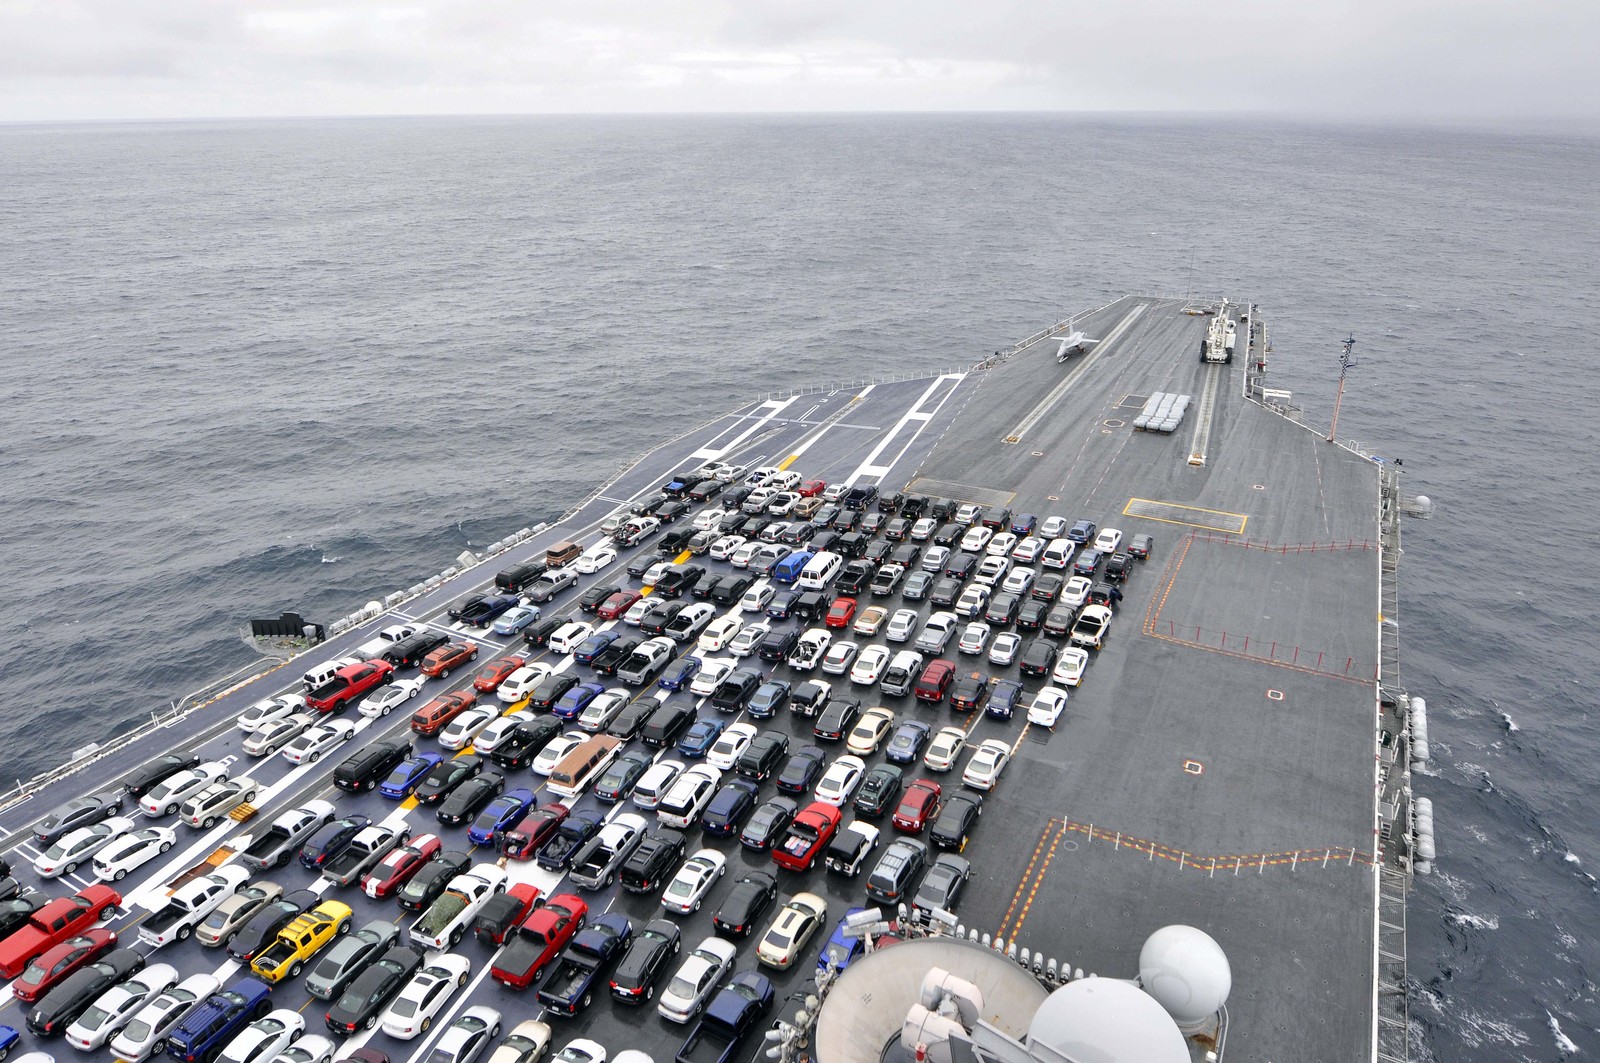 d_Reagan_%28CVN_76%29_transports_Sailors%27_vehicles_while_transiting_the_Pacific_coast_to_Naval.jpg